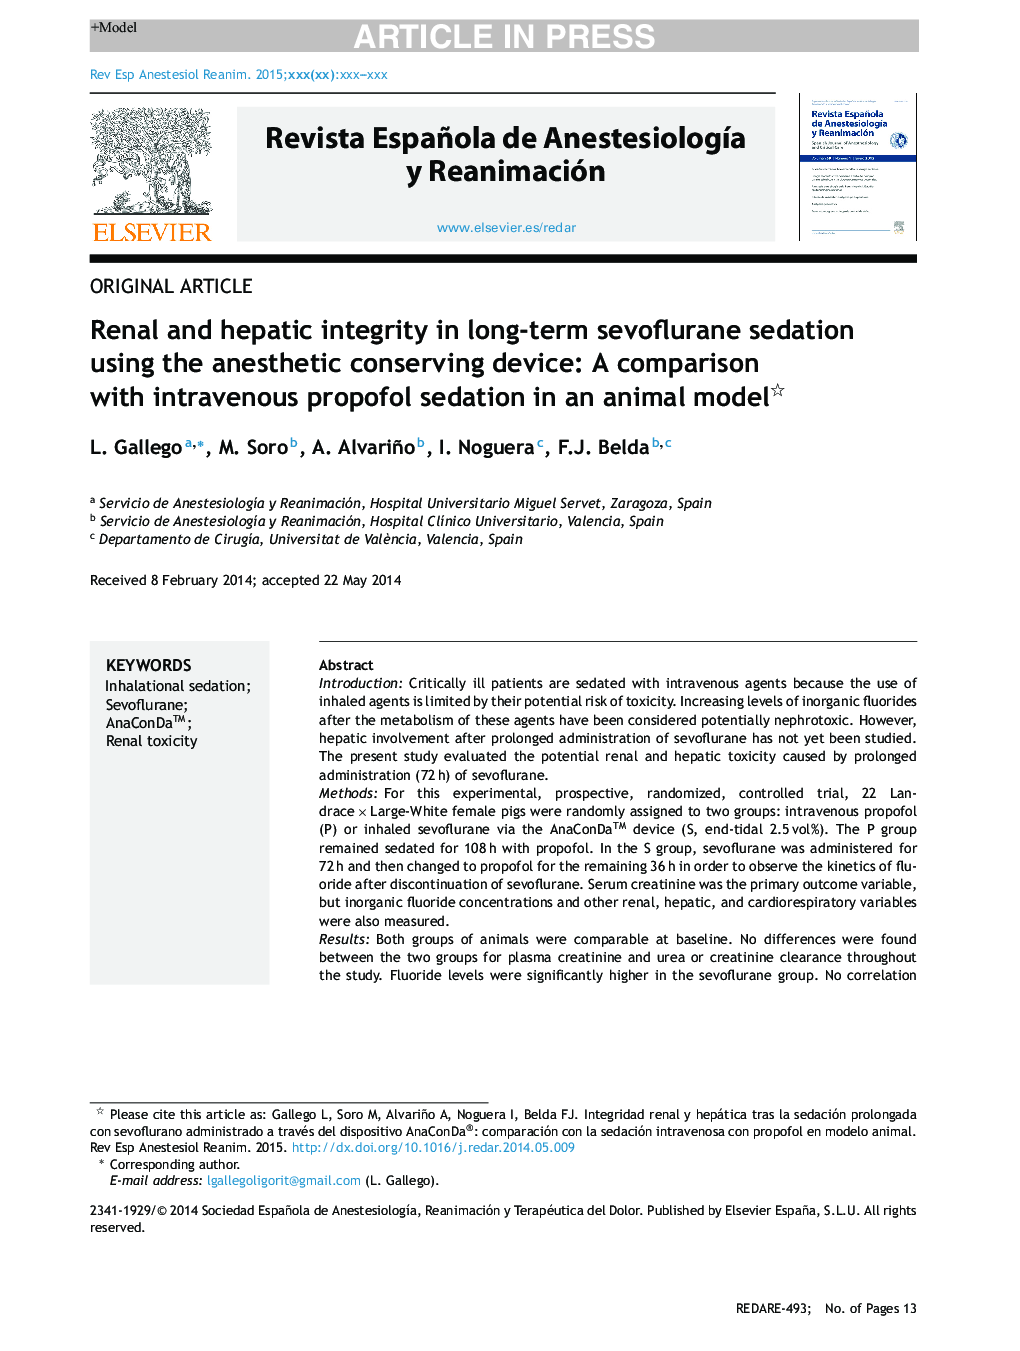 Renal and hepatic integrity in long-term sevoflurane sedation using the anesthetic conserving device: A comparison with intravenous propofol sedation in an animal model